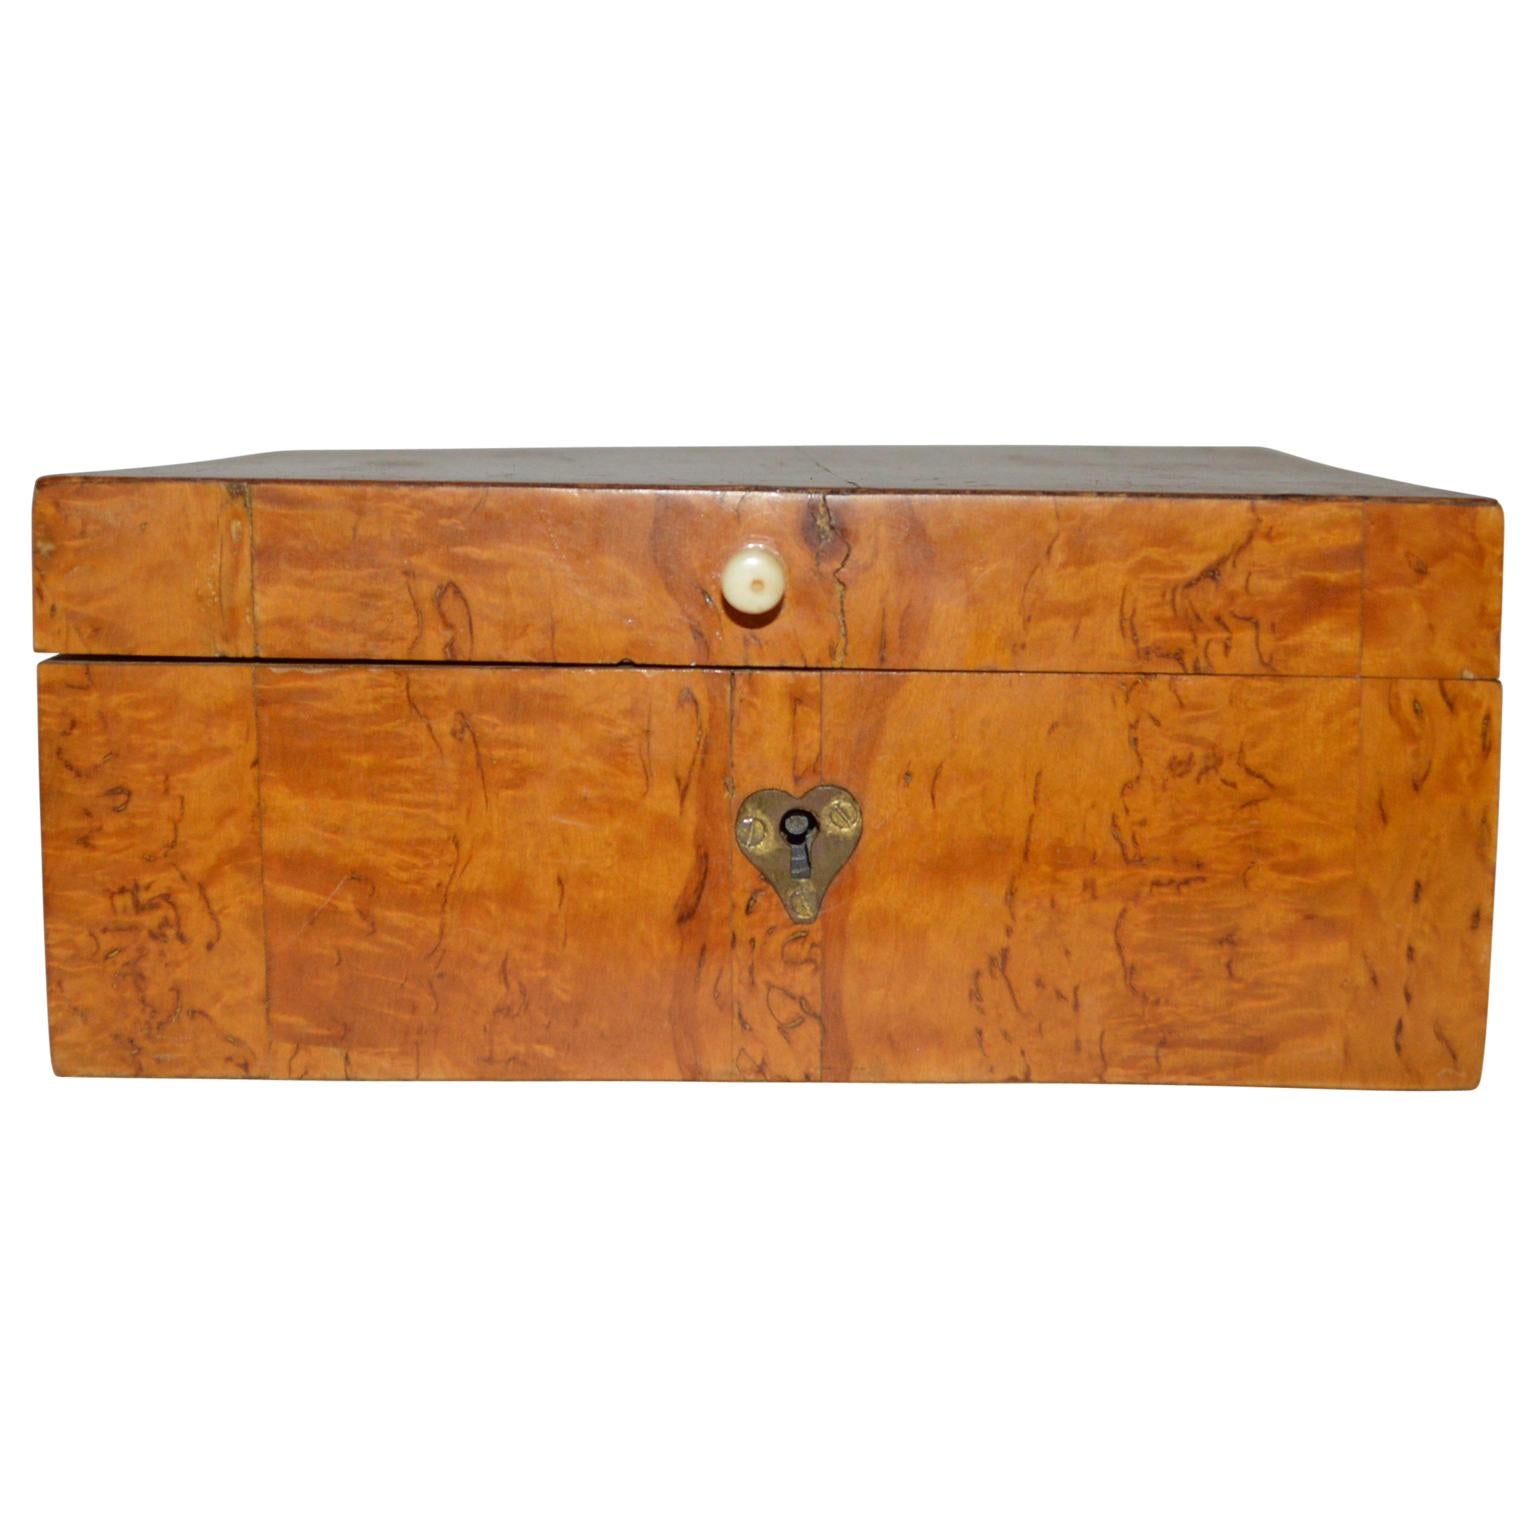 Swedish 19th century birchwood veneer jewelry box.

The box has a heart of brass for keyhole and knob hardware of antler.